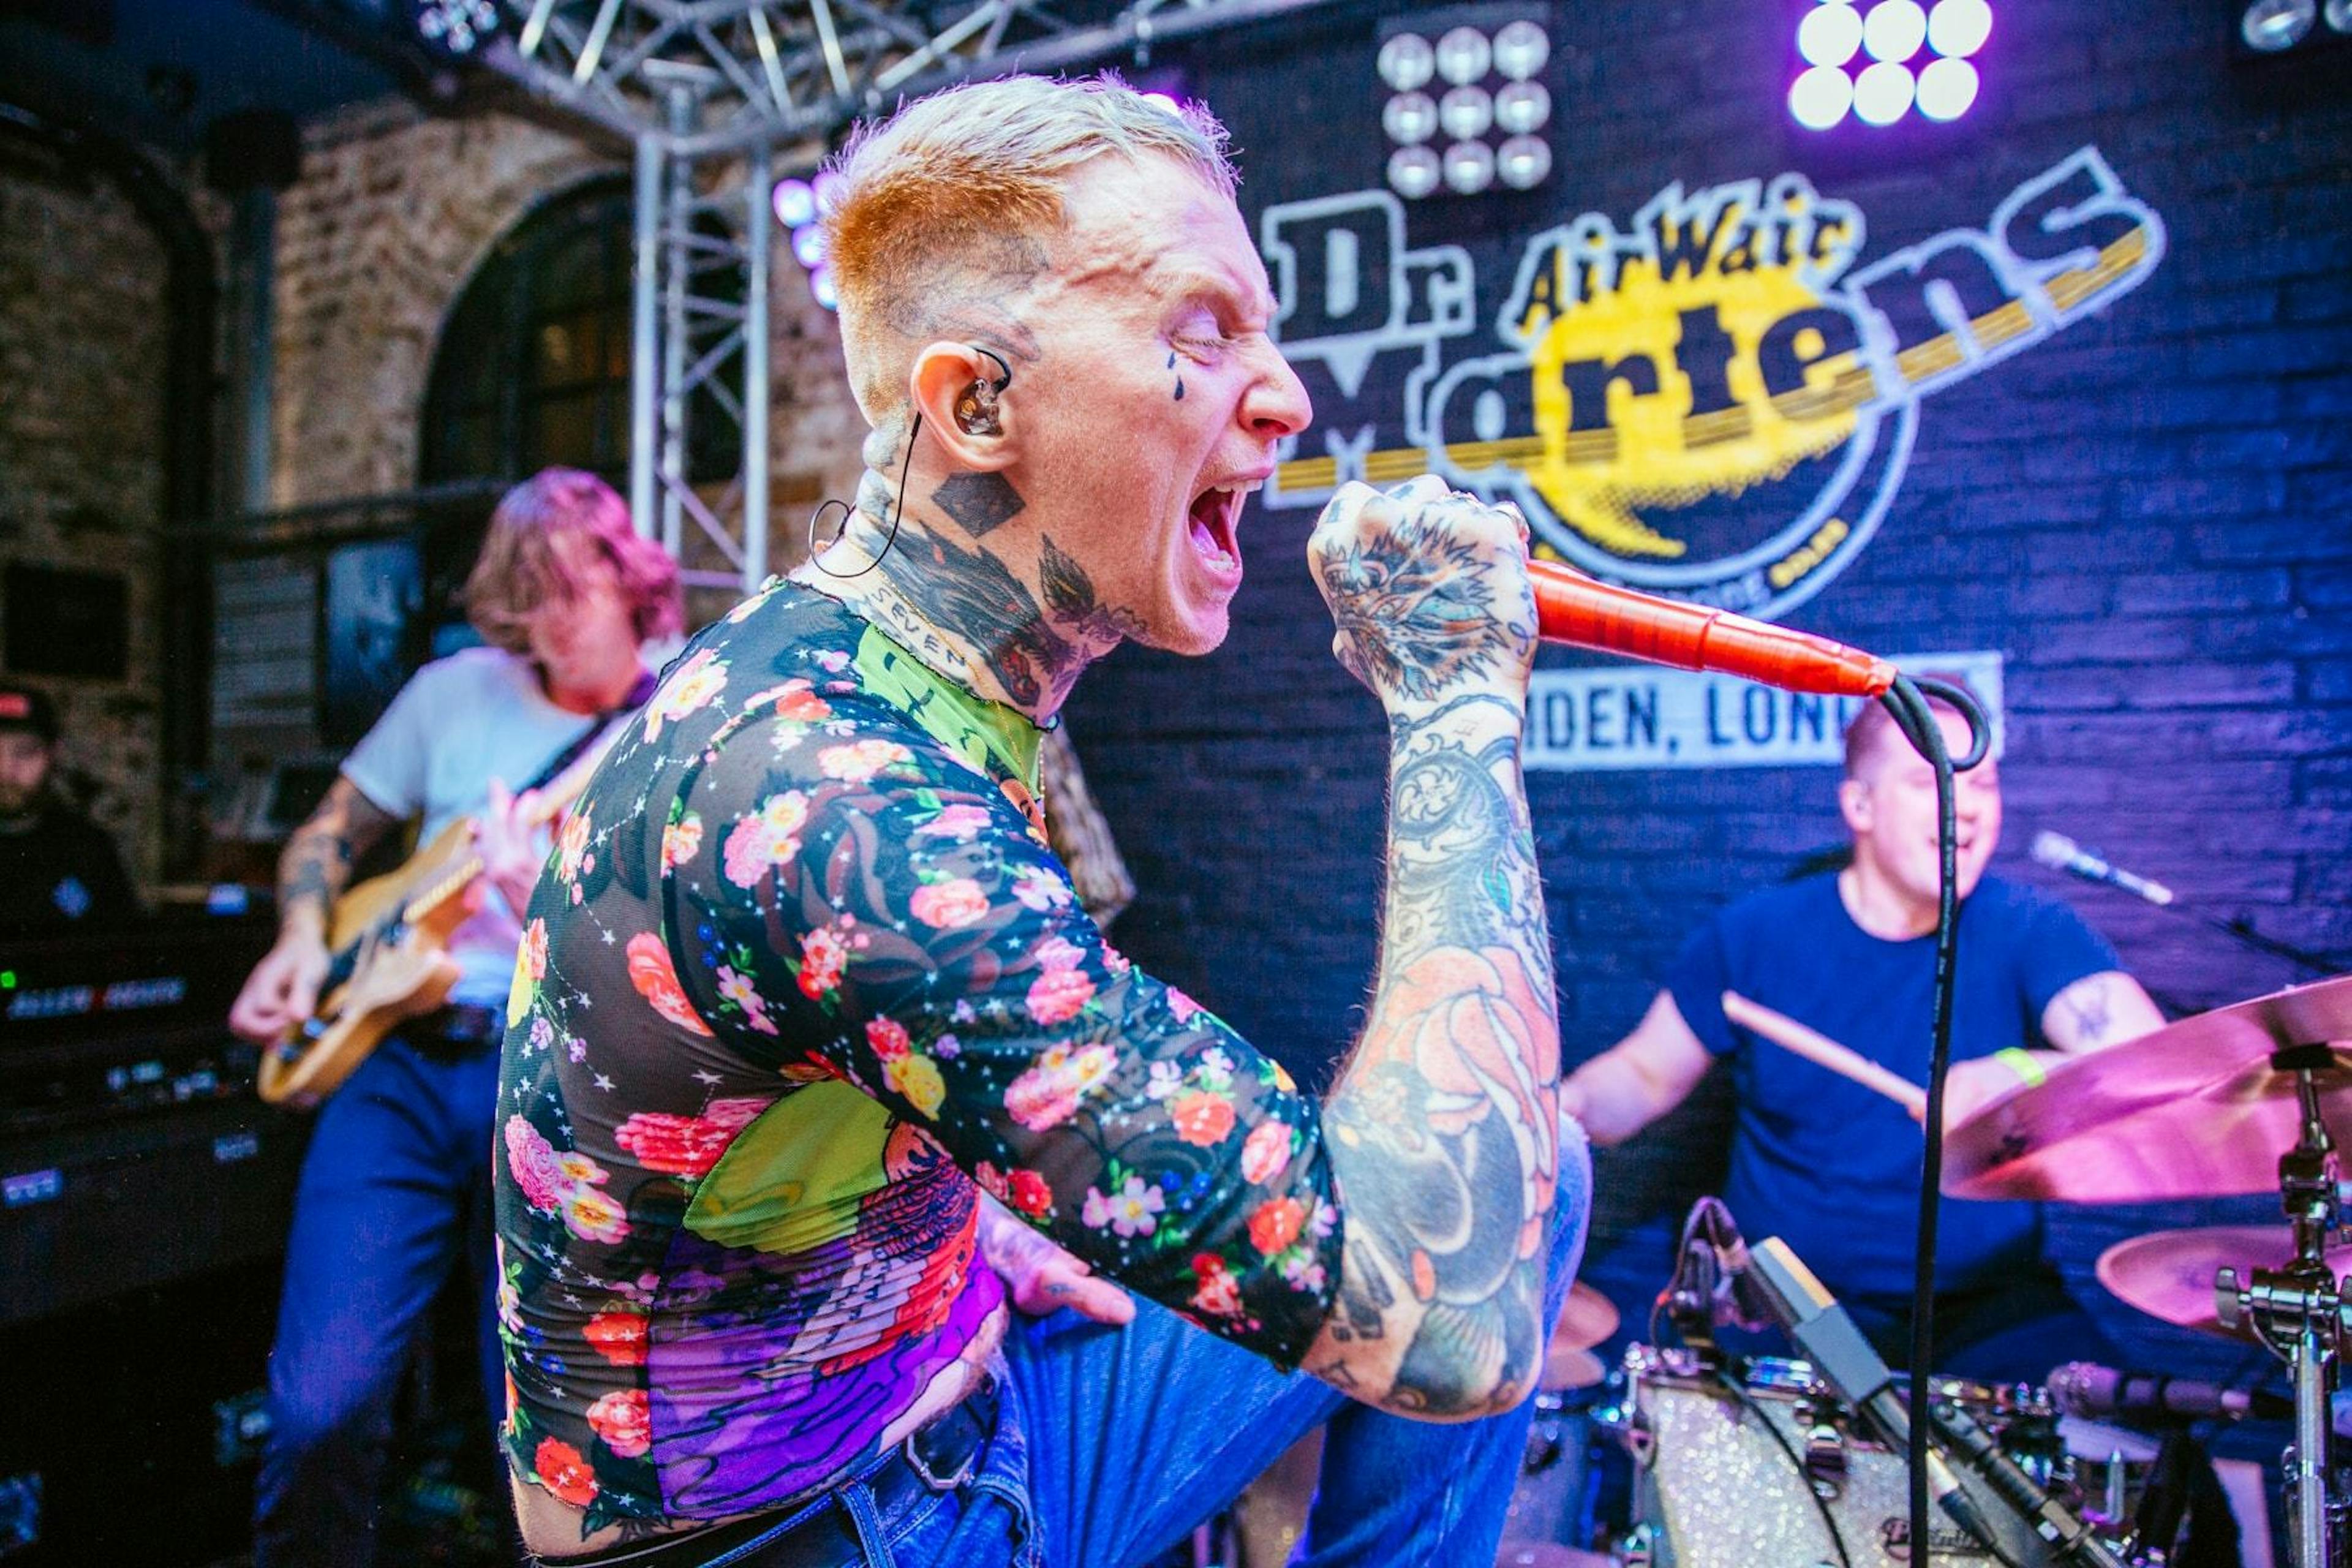 Gallery: Frank Carter & The Rattlesnakes Lay Waste To Camden